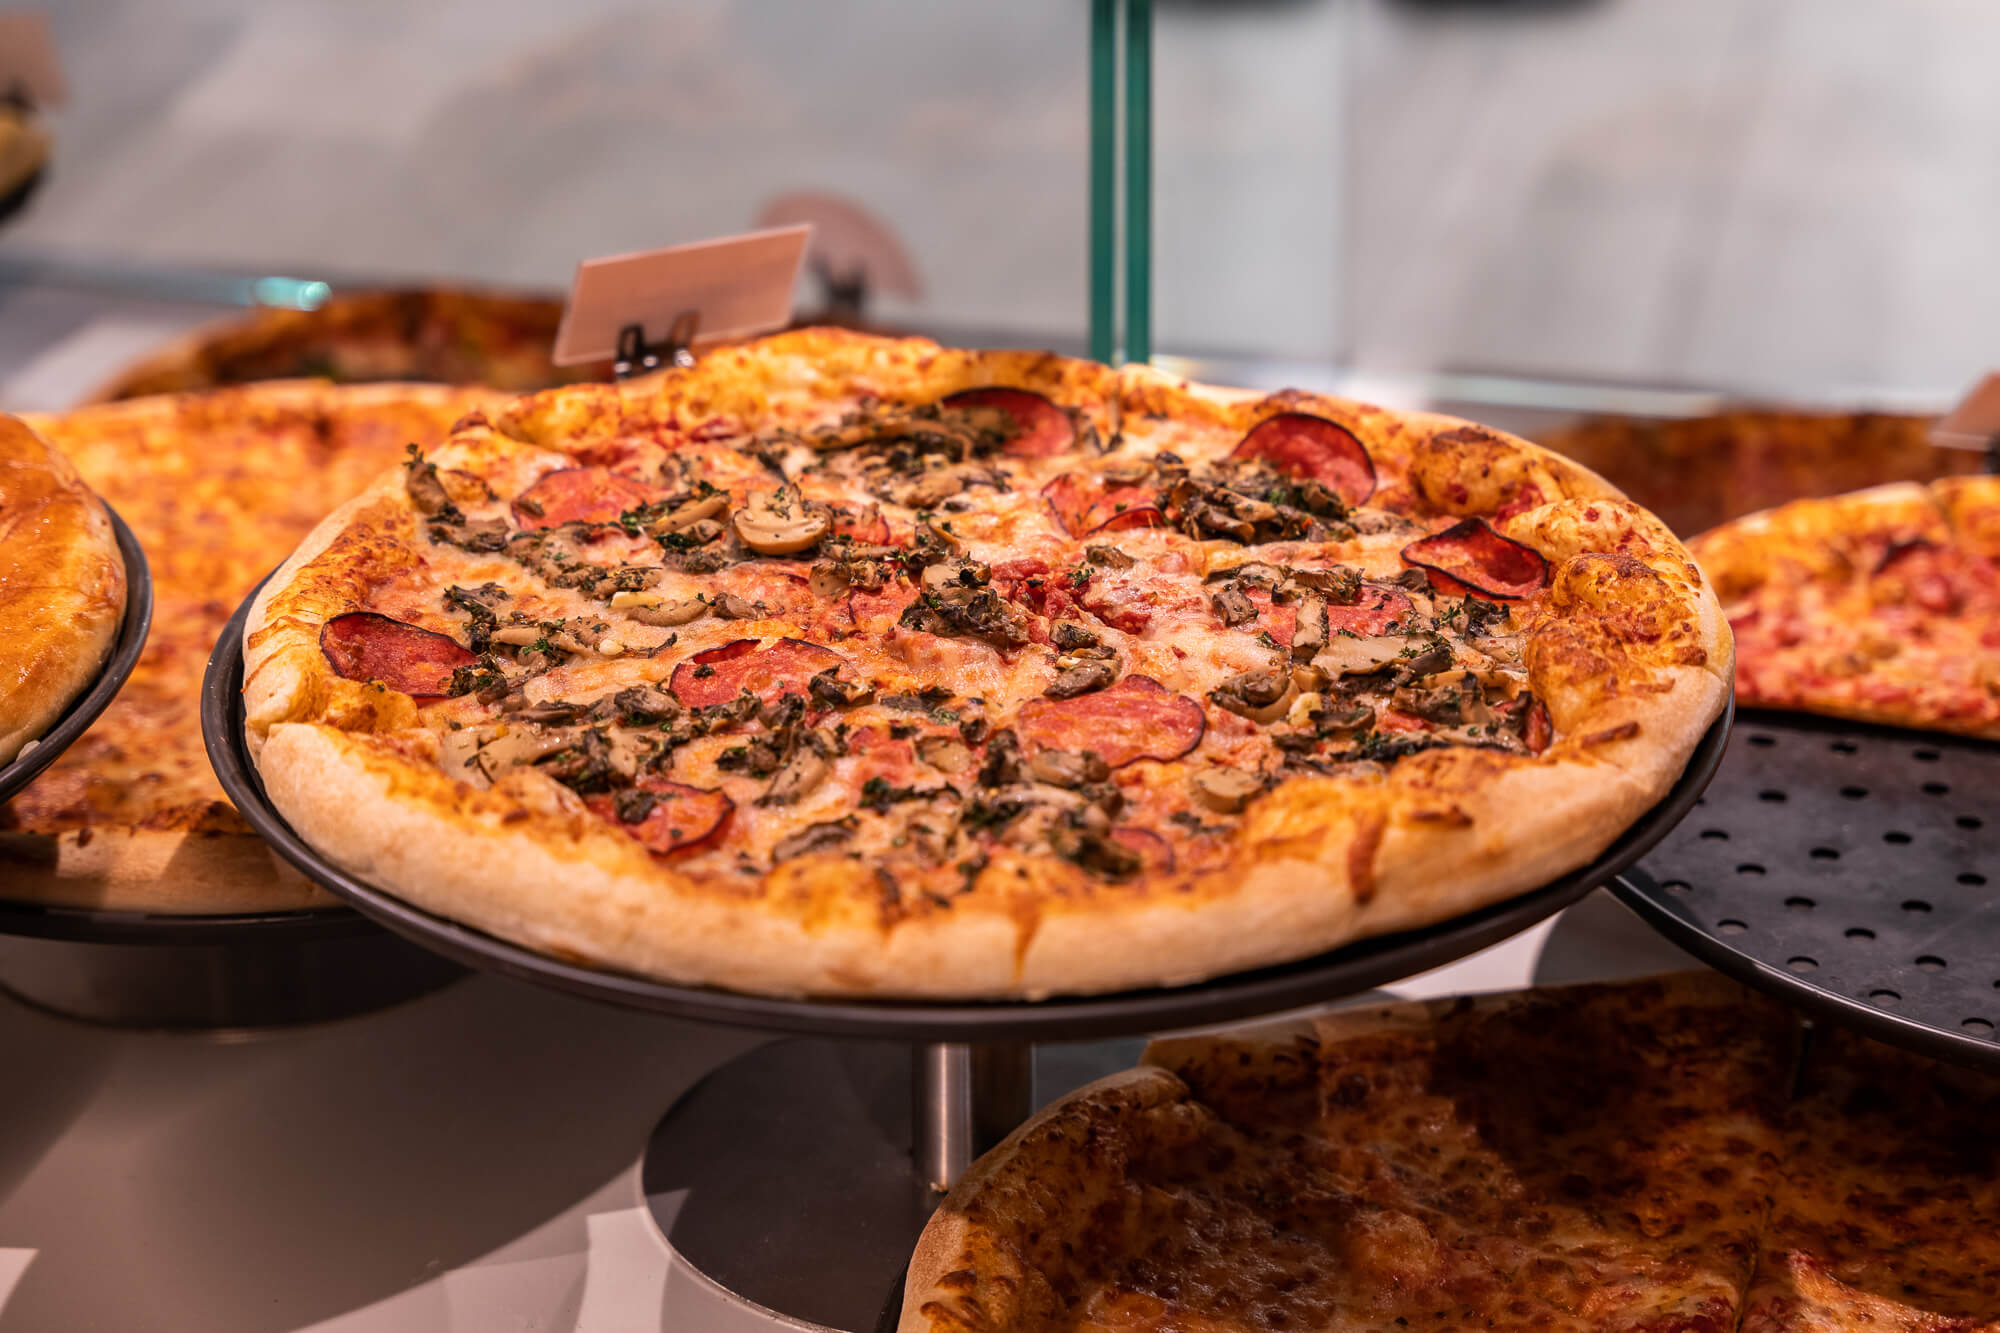 Freshly baked pizzas from Sbarro at Keflavik Airport